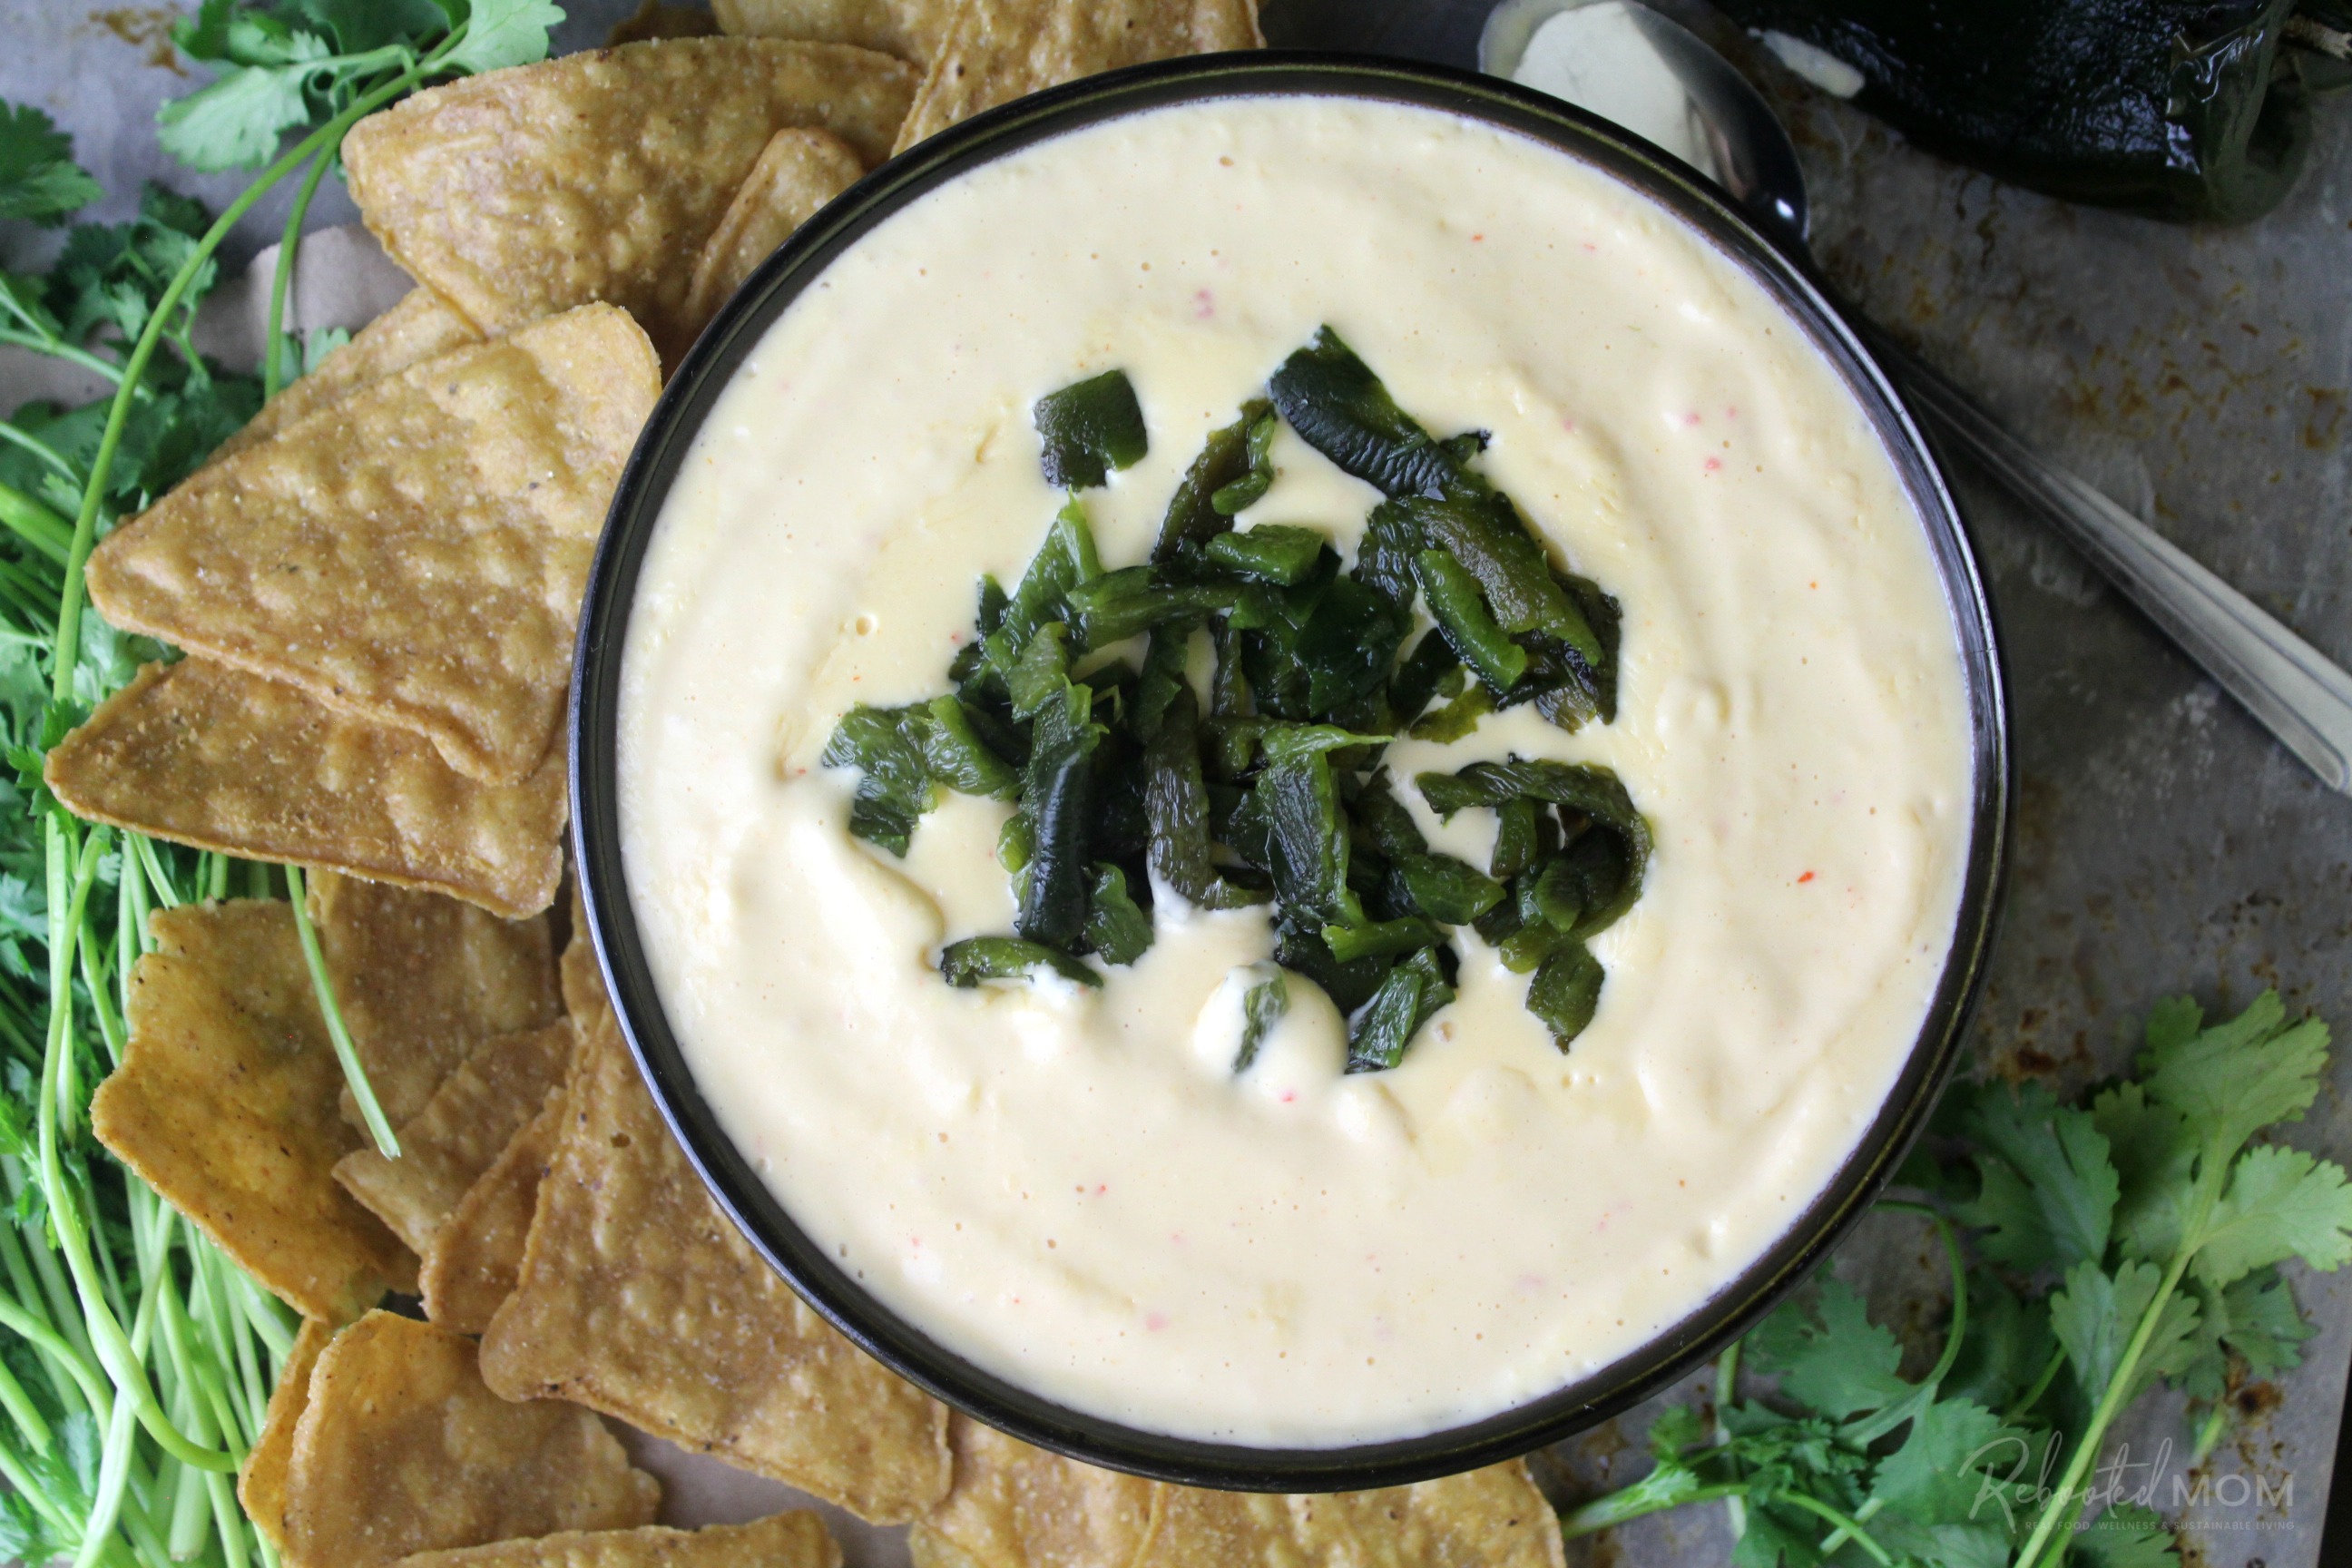 Fire Roasted Poblano Queso Dip surrounded by a plate of fresh tortilla chips